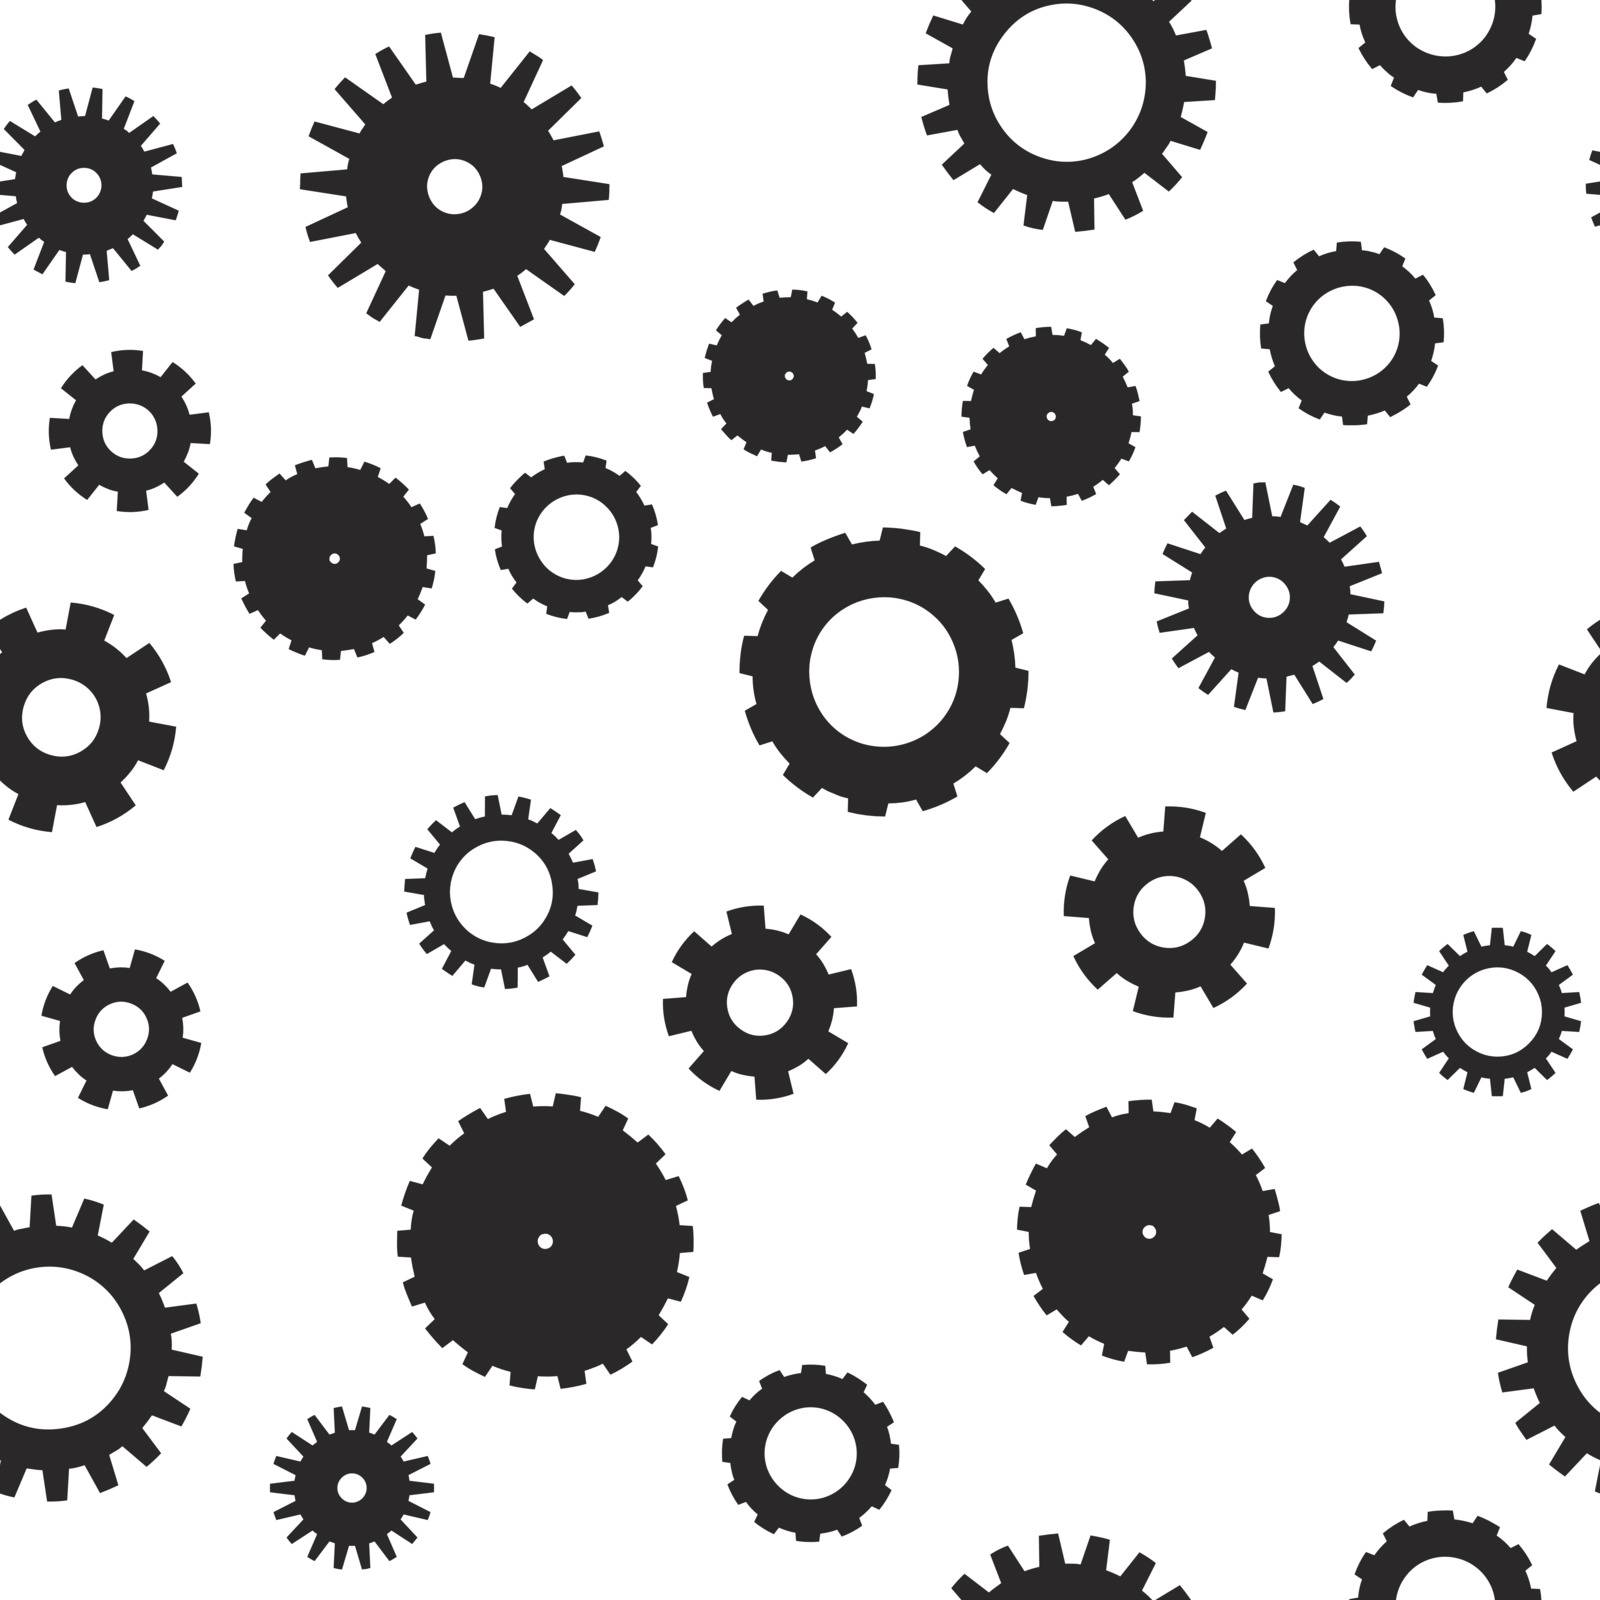 Cog wheel seamless pattern. Clockwork, technological or industrial theme. Flat vector background in black and white.